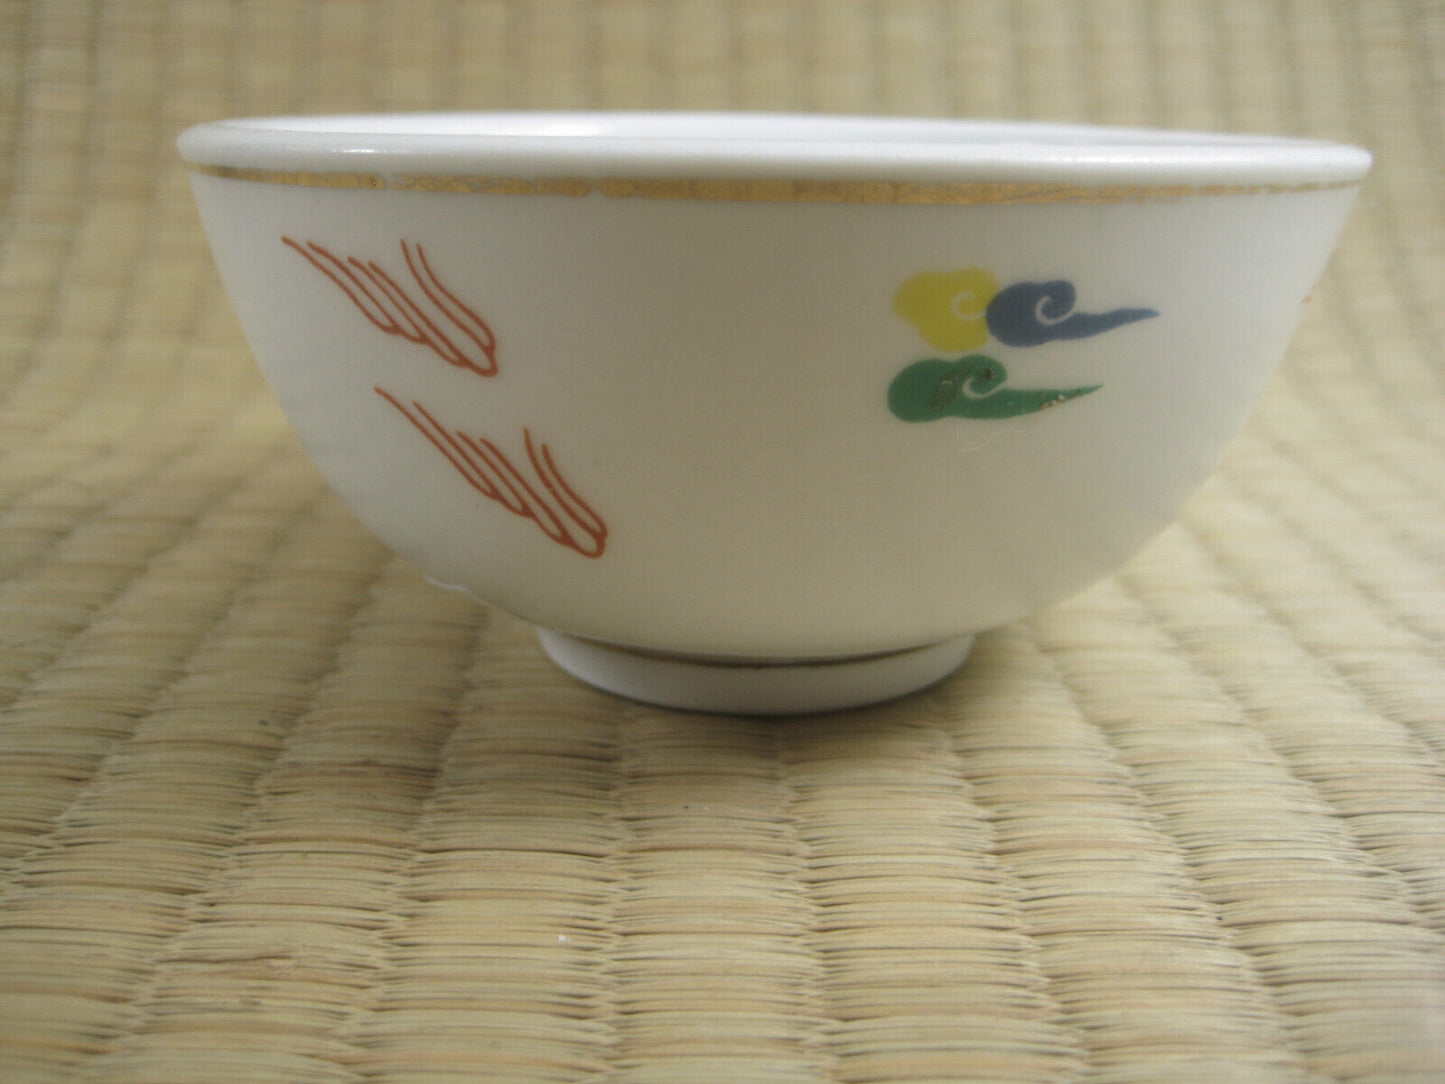 Vintage Chinese Resturaunt Soup Bowls With Red Dragon And Made In China Stamp